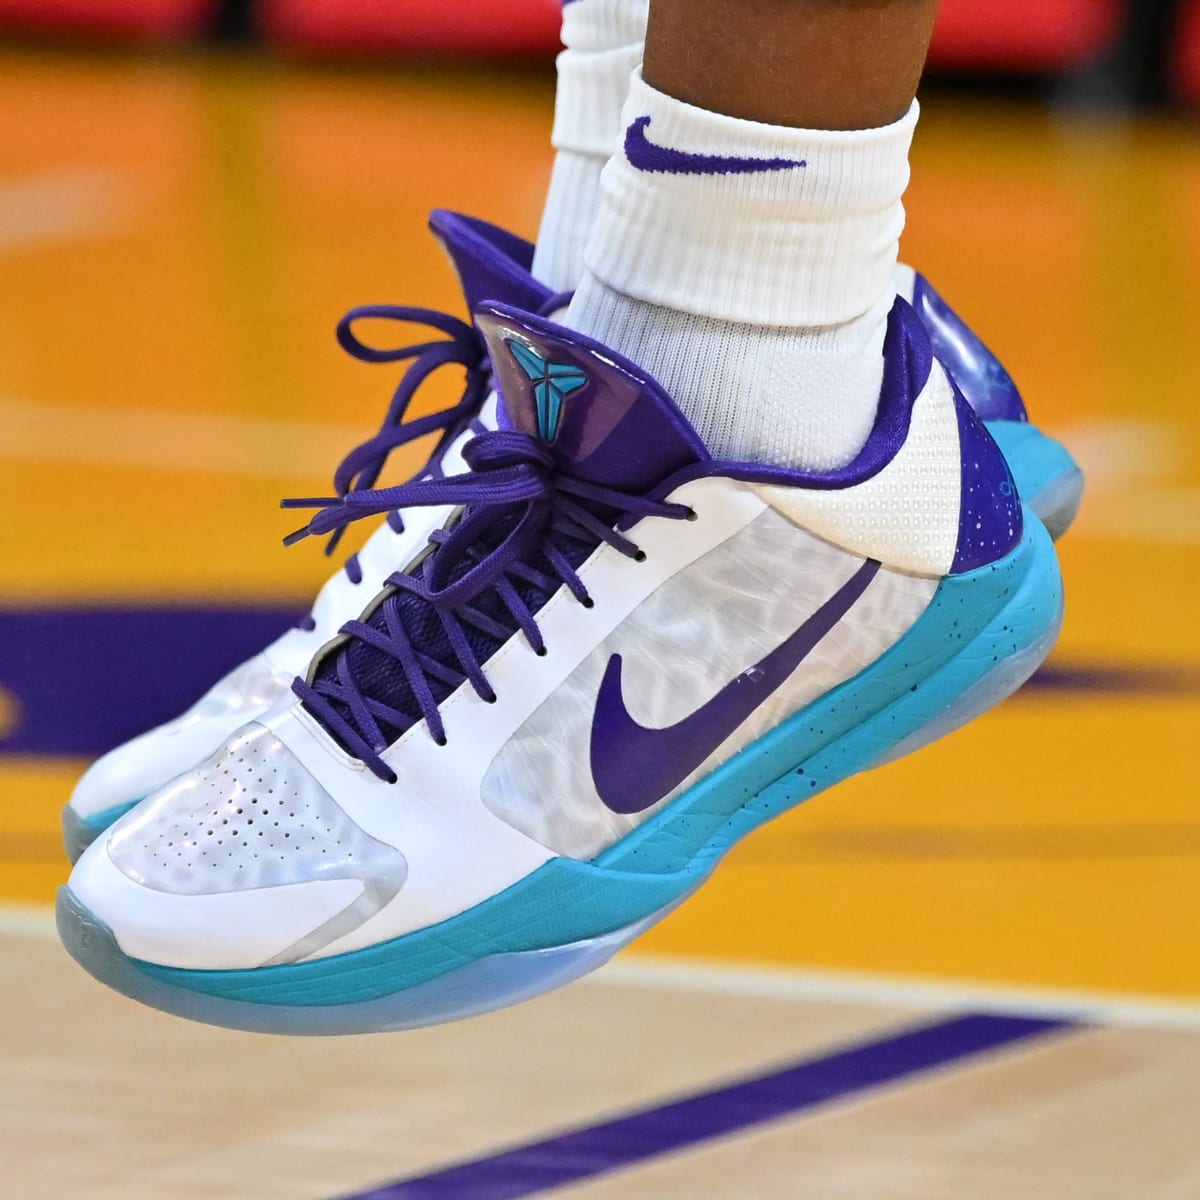 What Pros Wear: Devin Booker's Nike Kobe 6 Protro Shoes - What